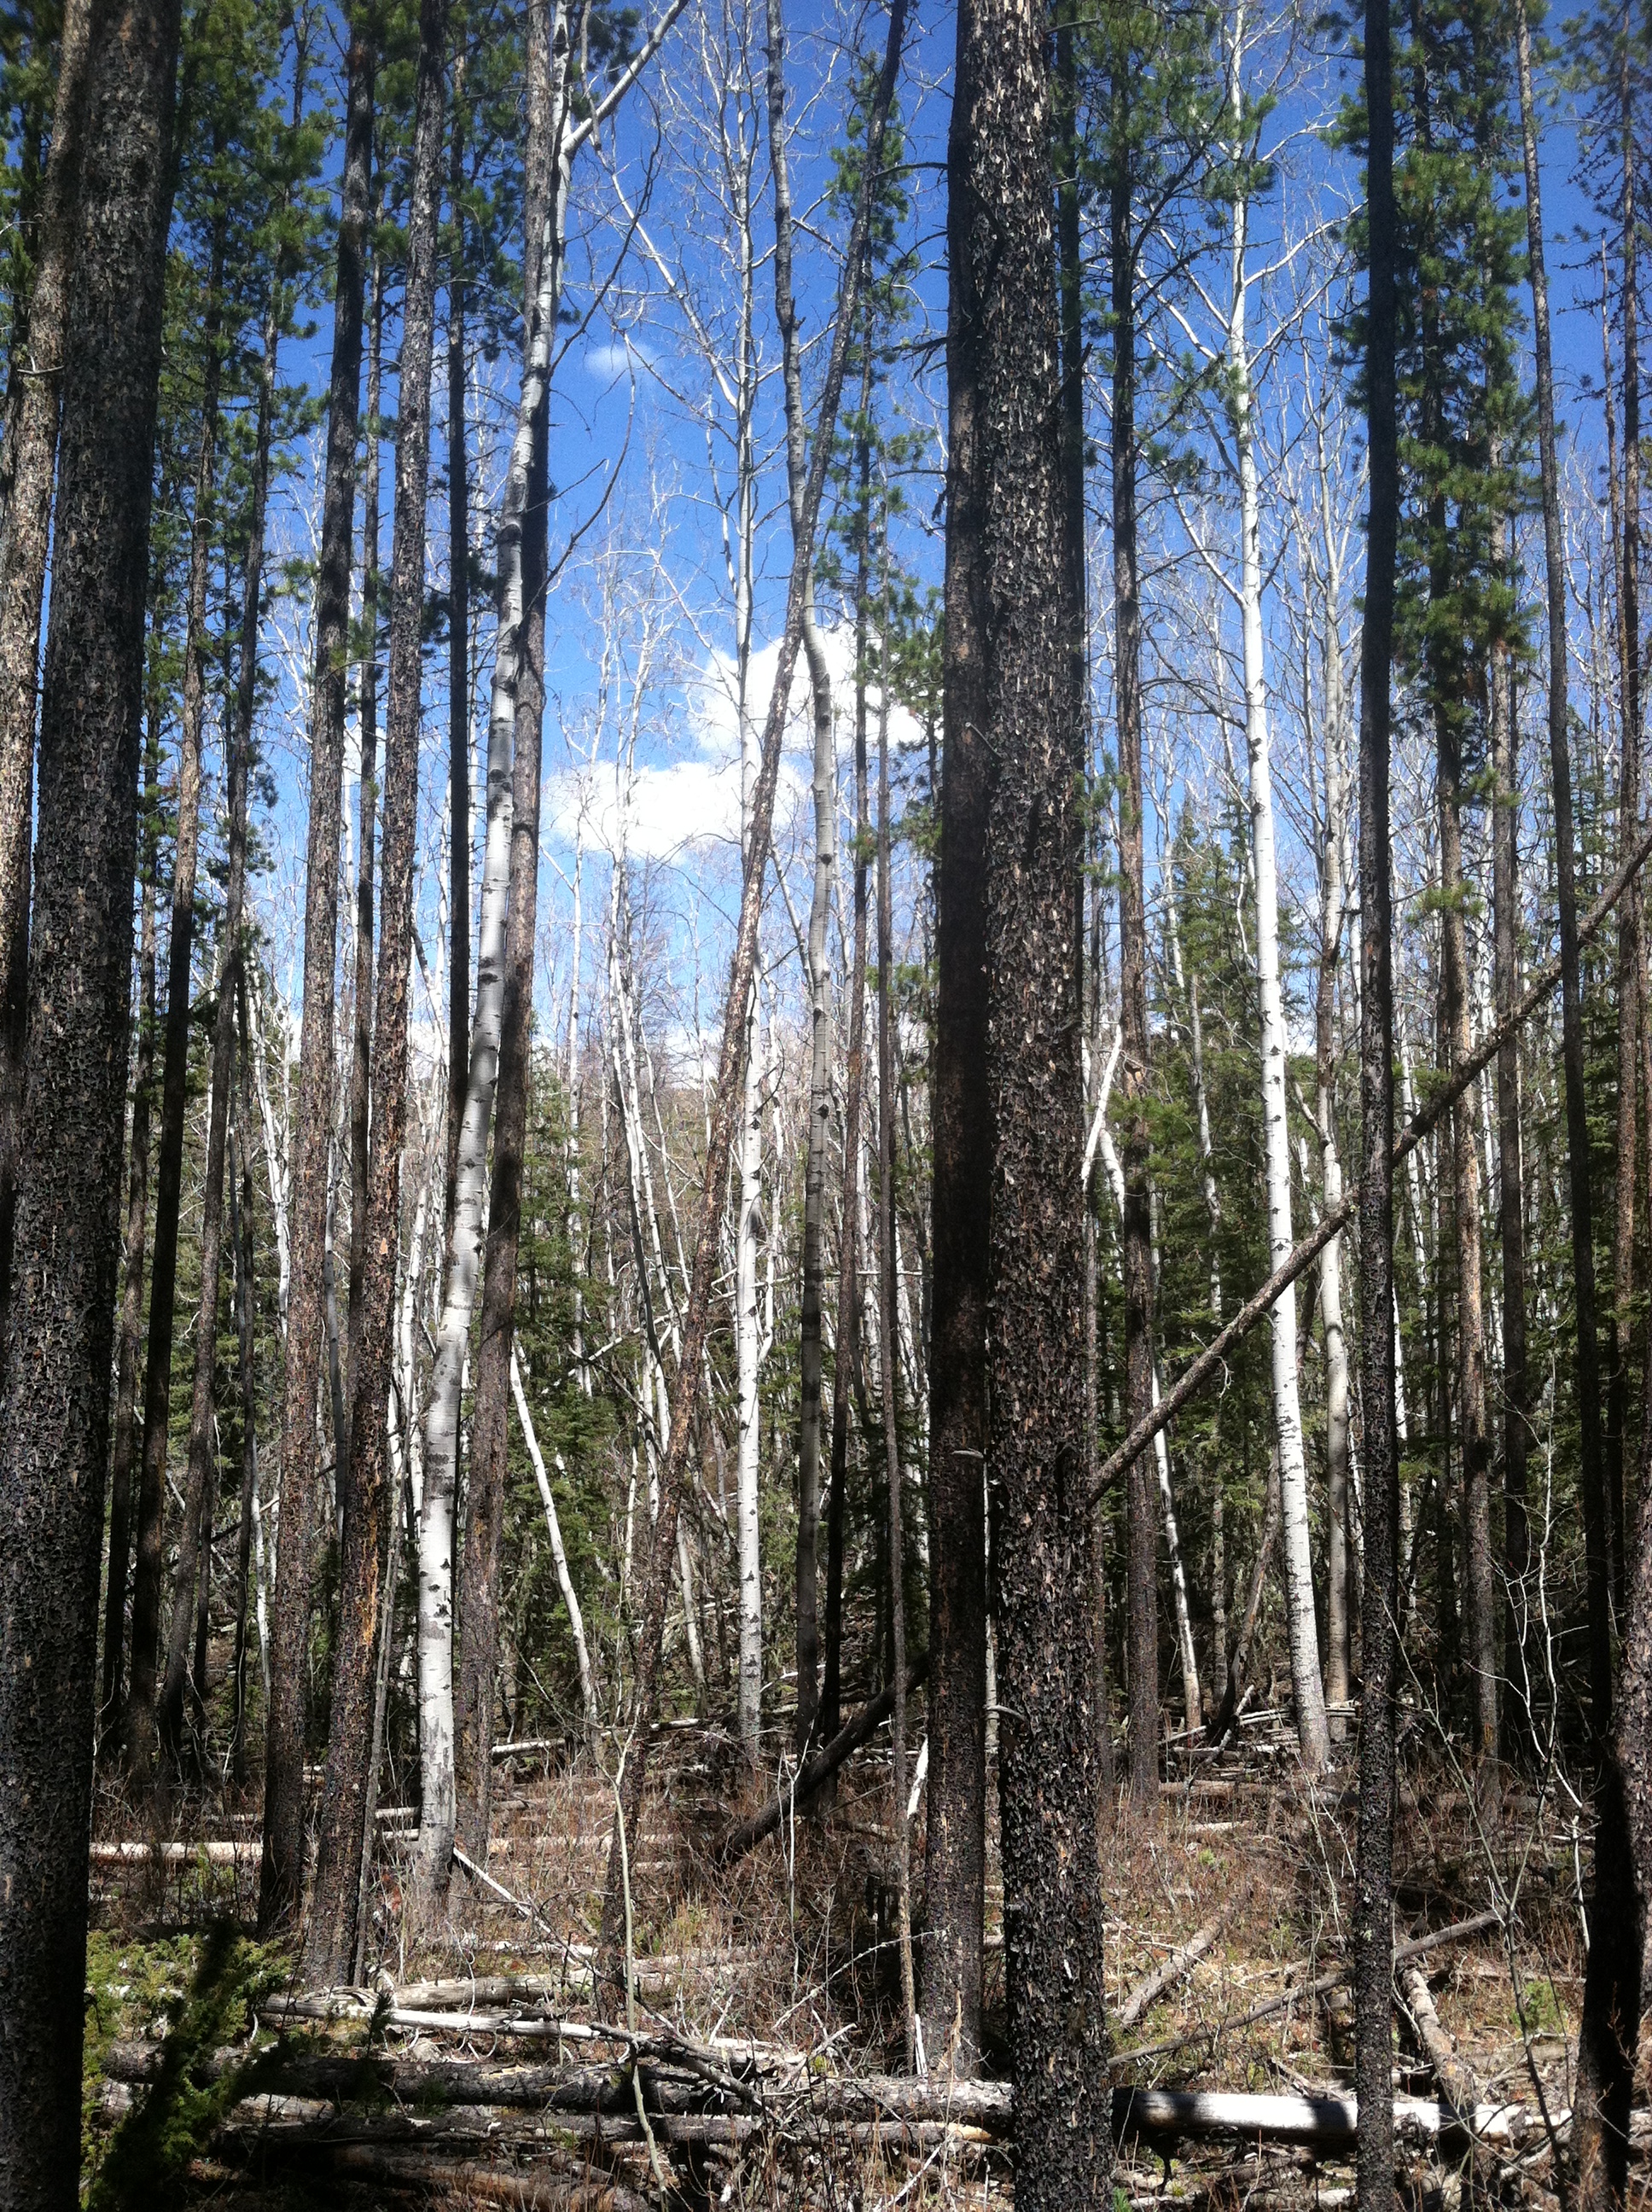 Aspen Stand with Conifer Encroachment in the North Fork Project Area